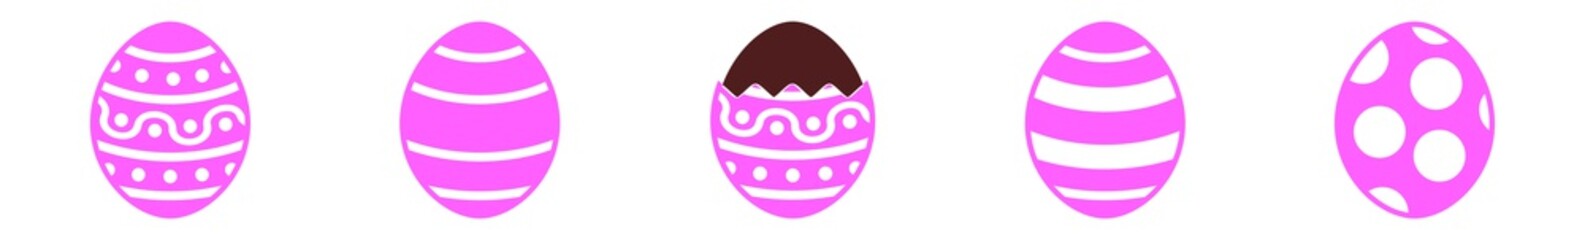 Easter Egg Chocolate Icon Purple | Painted Eggs Illustration | Happy Easter Hunt Symbol | Holiday Logo | April Spring Sign | Isolated | Variations